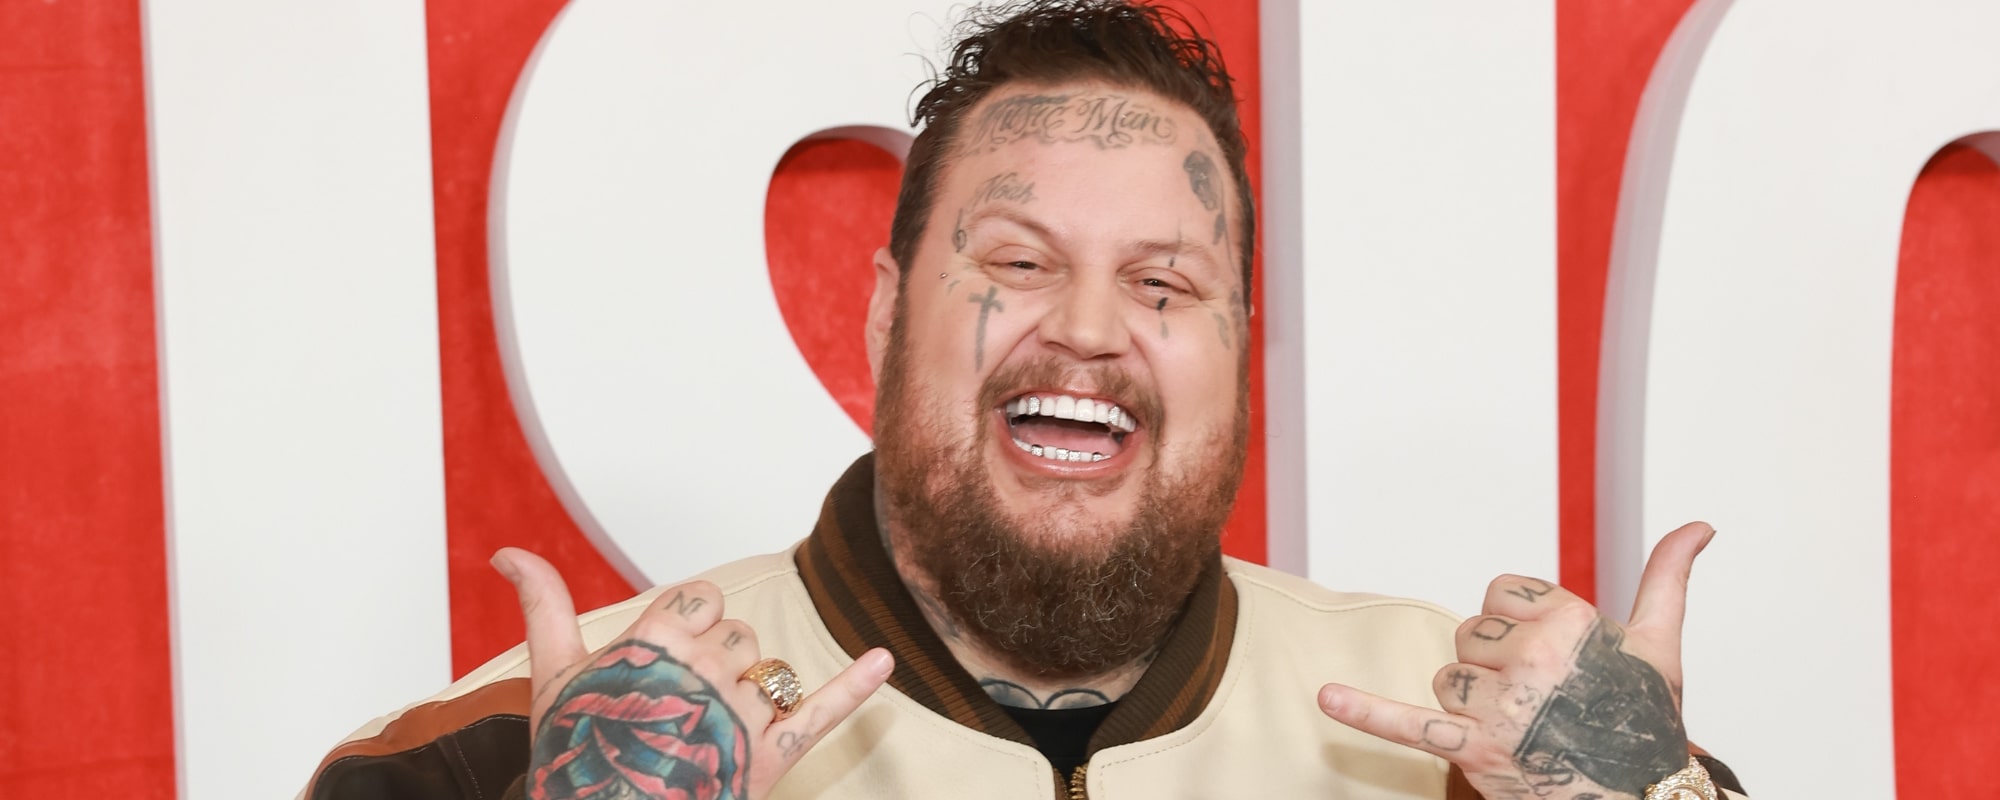 Jelly Roll Reveals That His Next Album Will Feature “Crazy” Collaborations